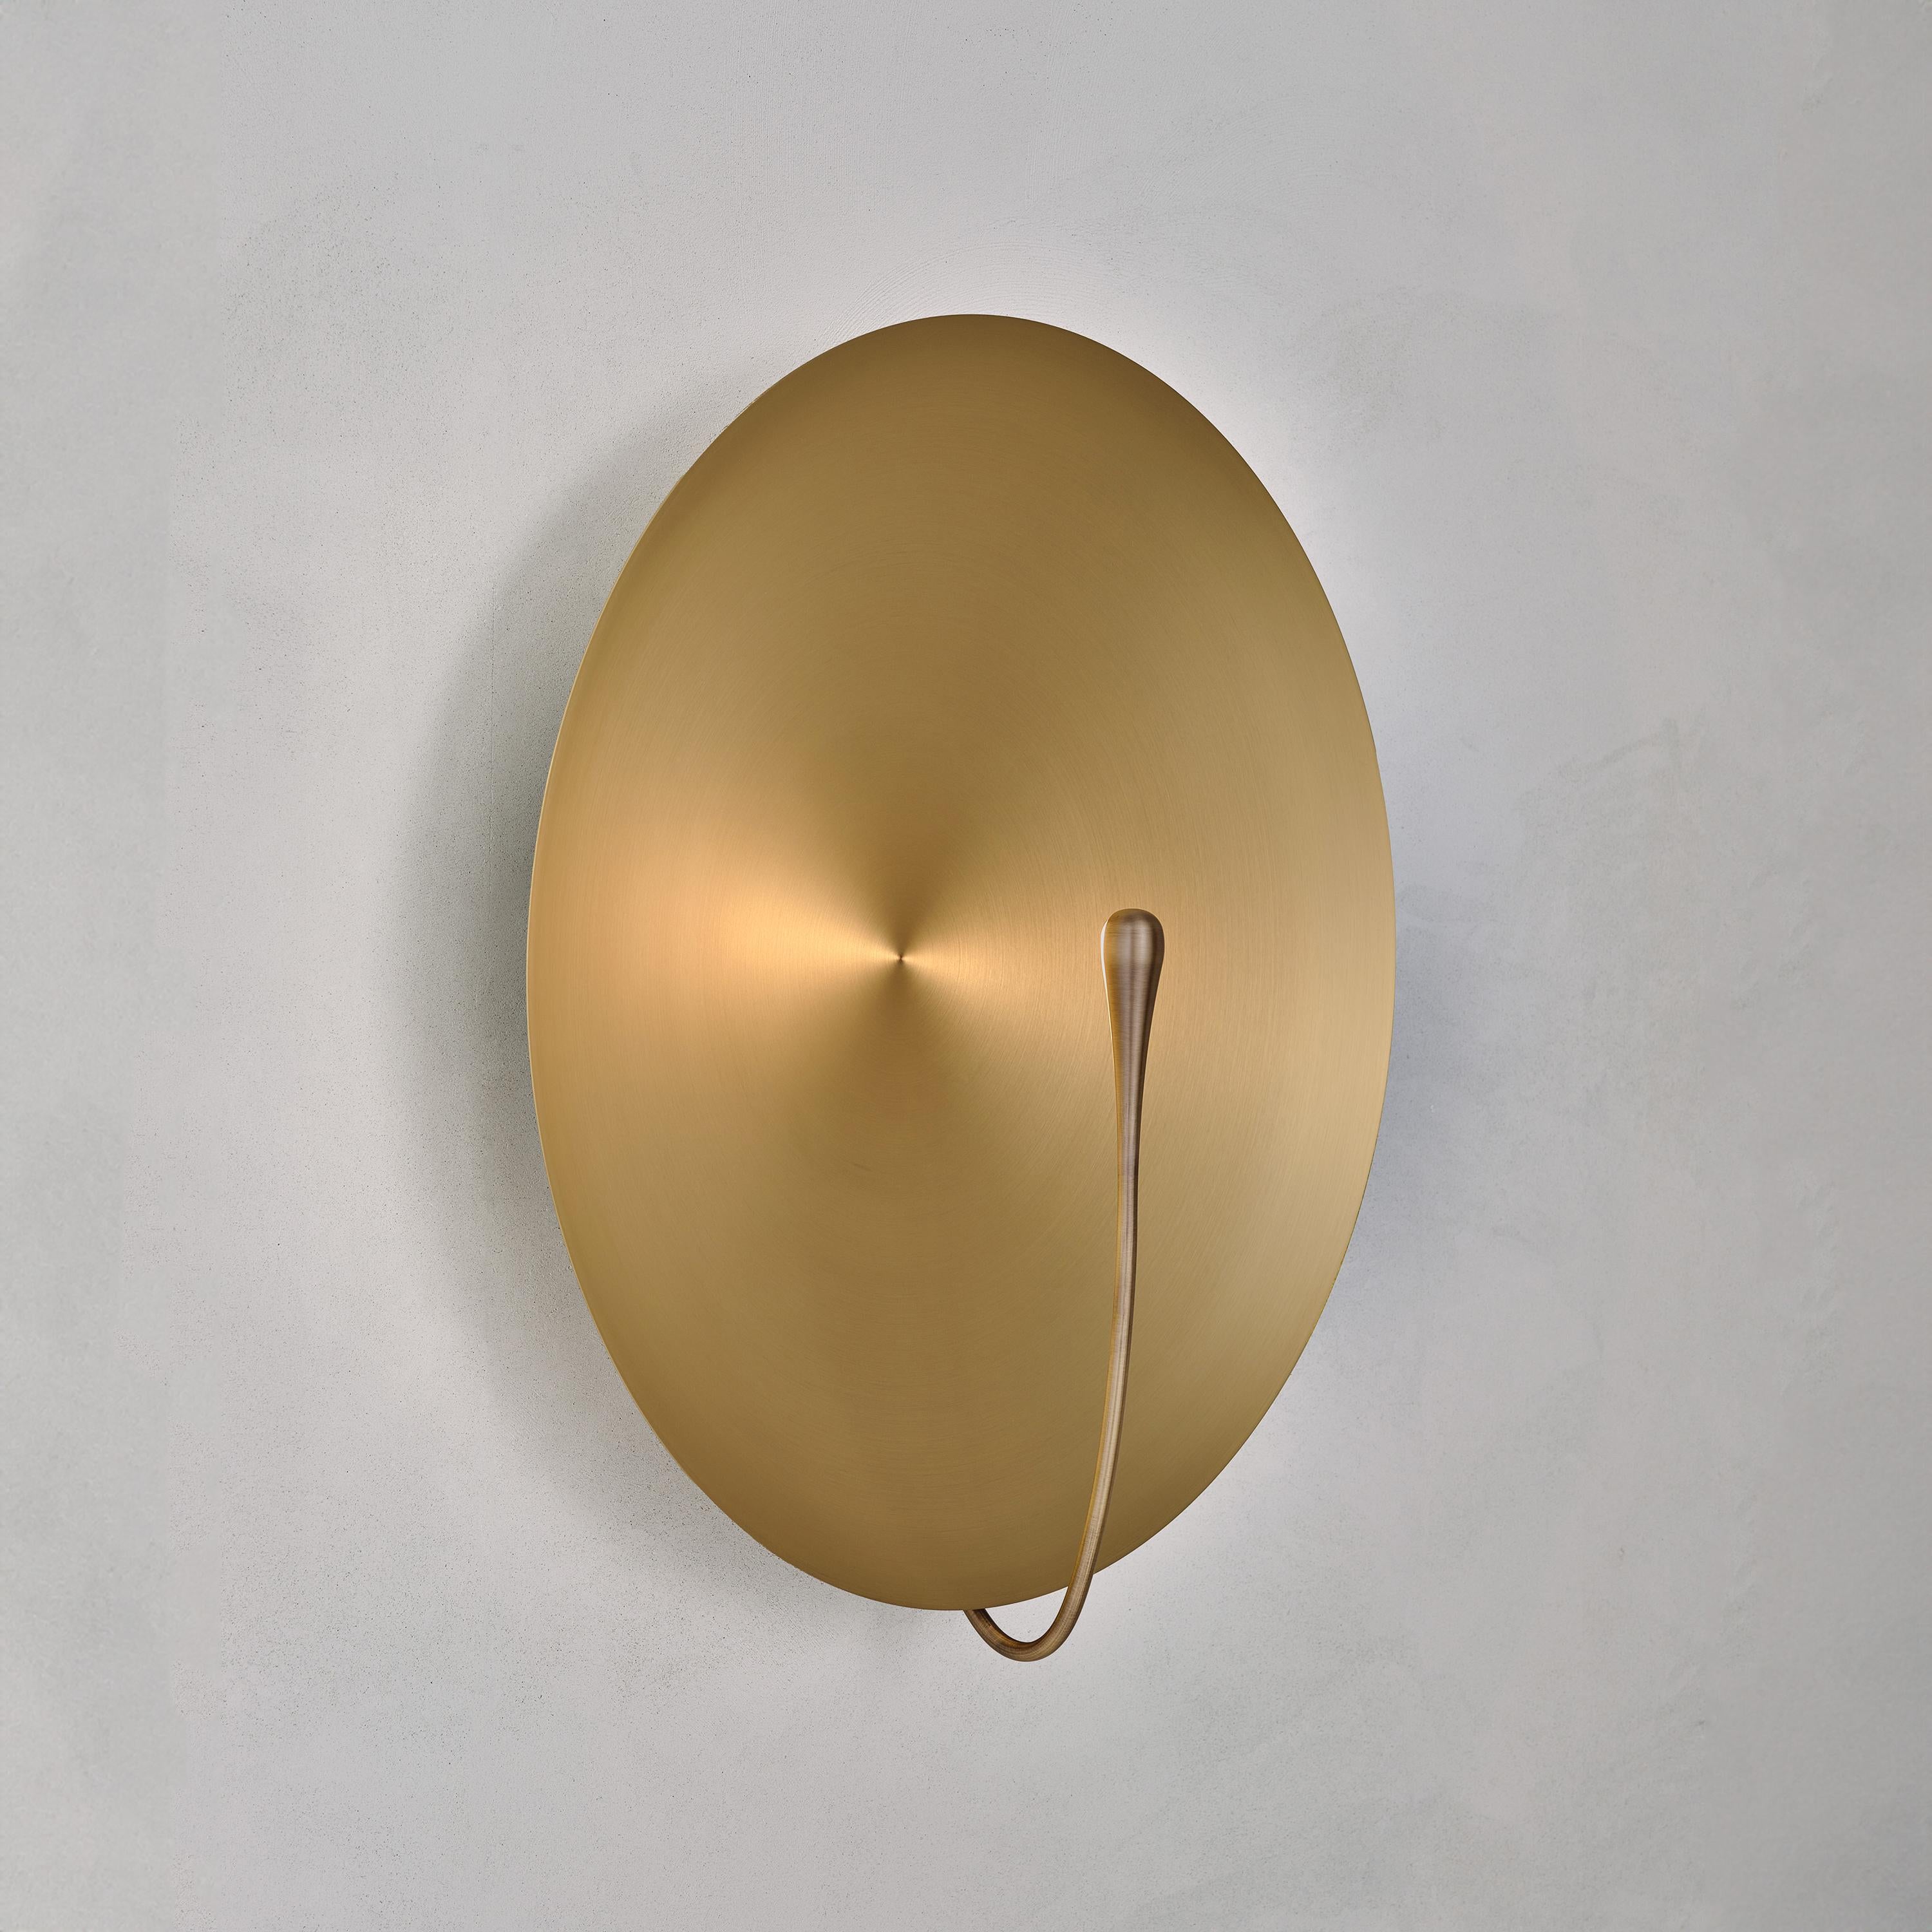 British 'Cosmic Sol XL' Handmade Brushed Brass Contemporary Wall Light Sconce For Sale